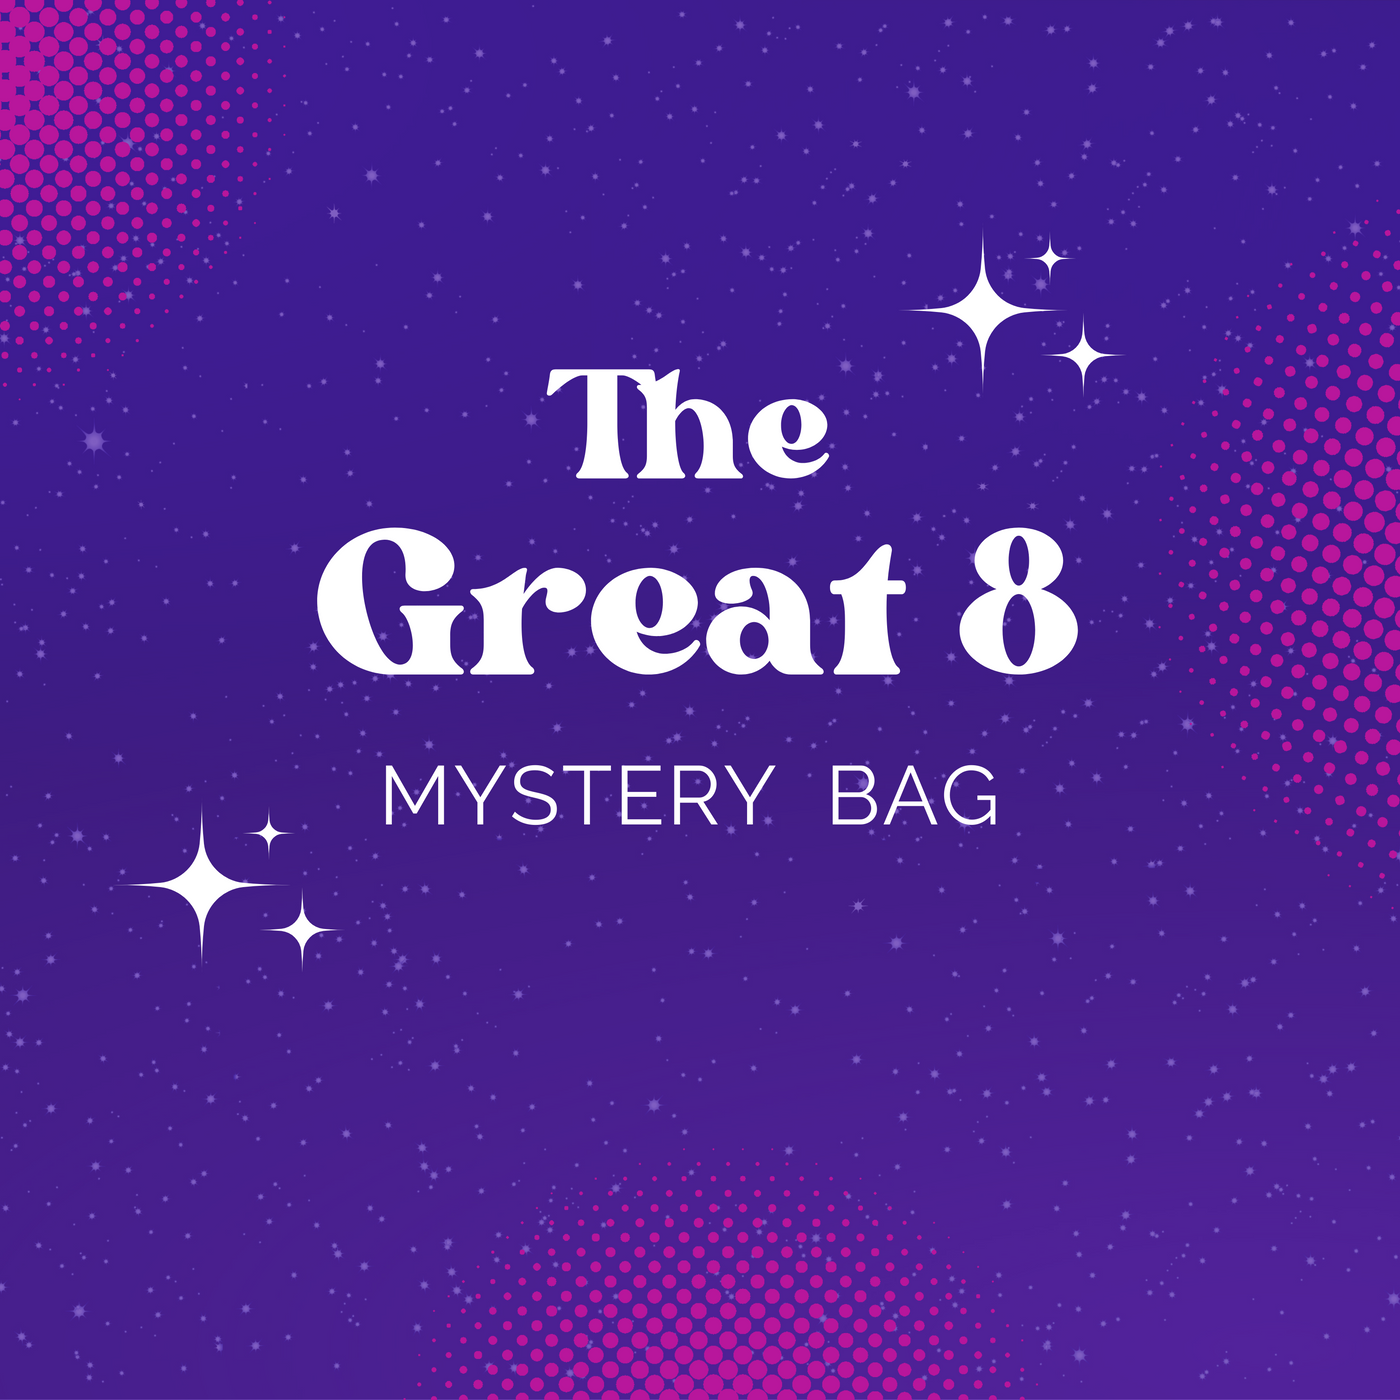 THE GREAT 8 MYSTERY BAG